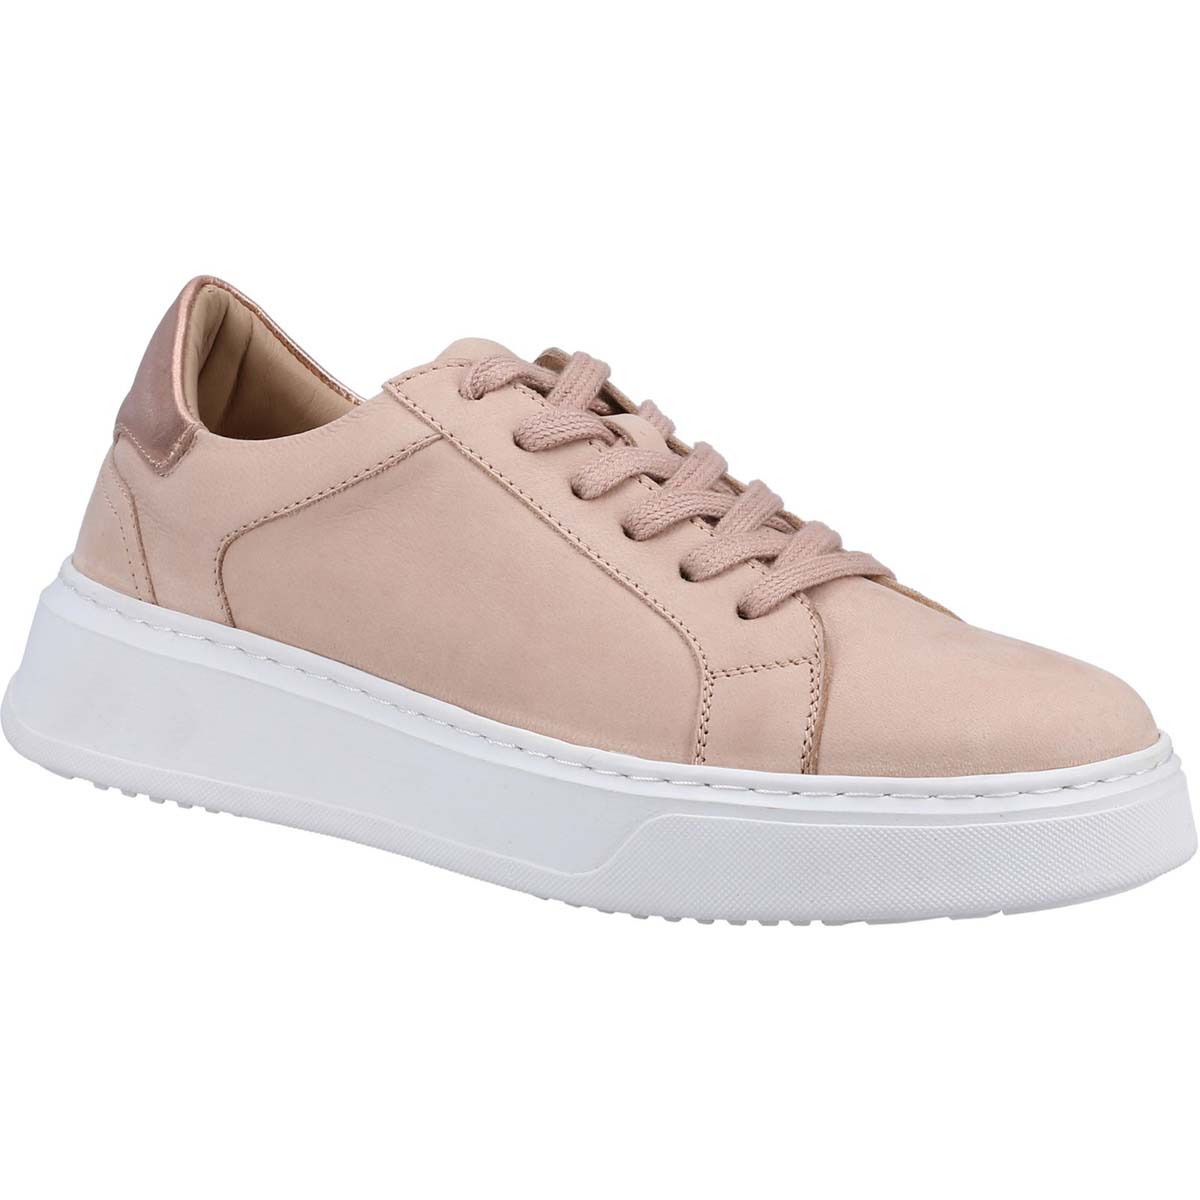 Hush Puppies Camille Rose pink Womens trainers 36580-68192 in a Plain Leather in Size 8